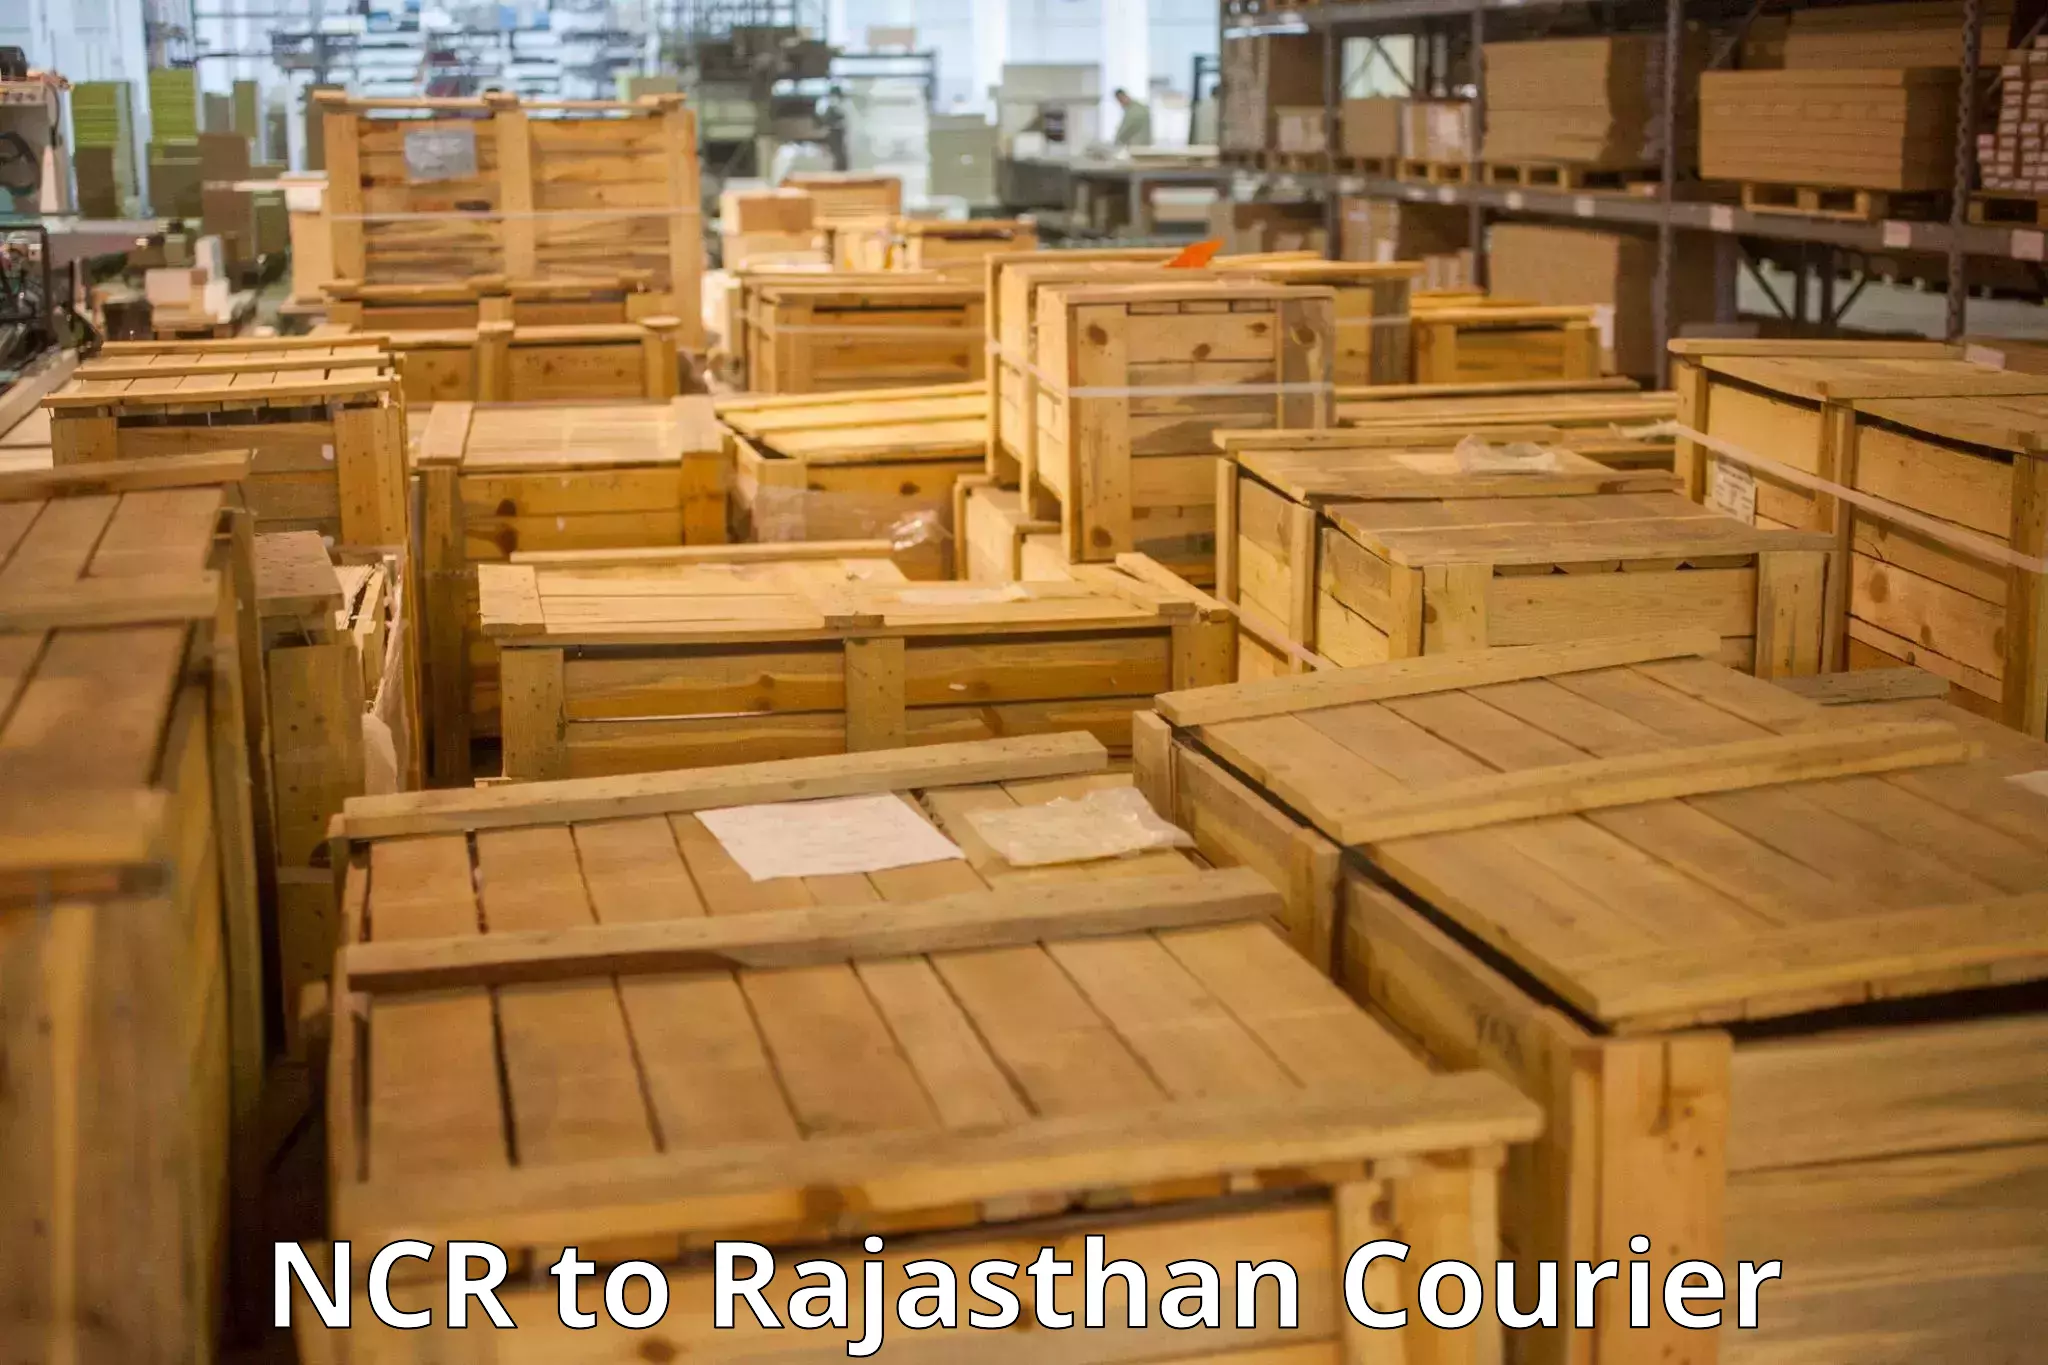 Baggage shipping experience NCR to Rajasthan